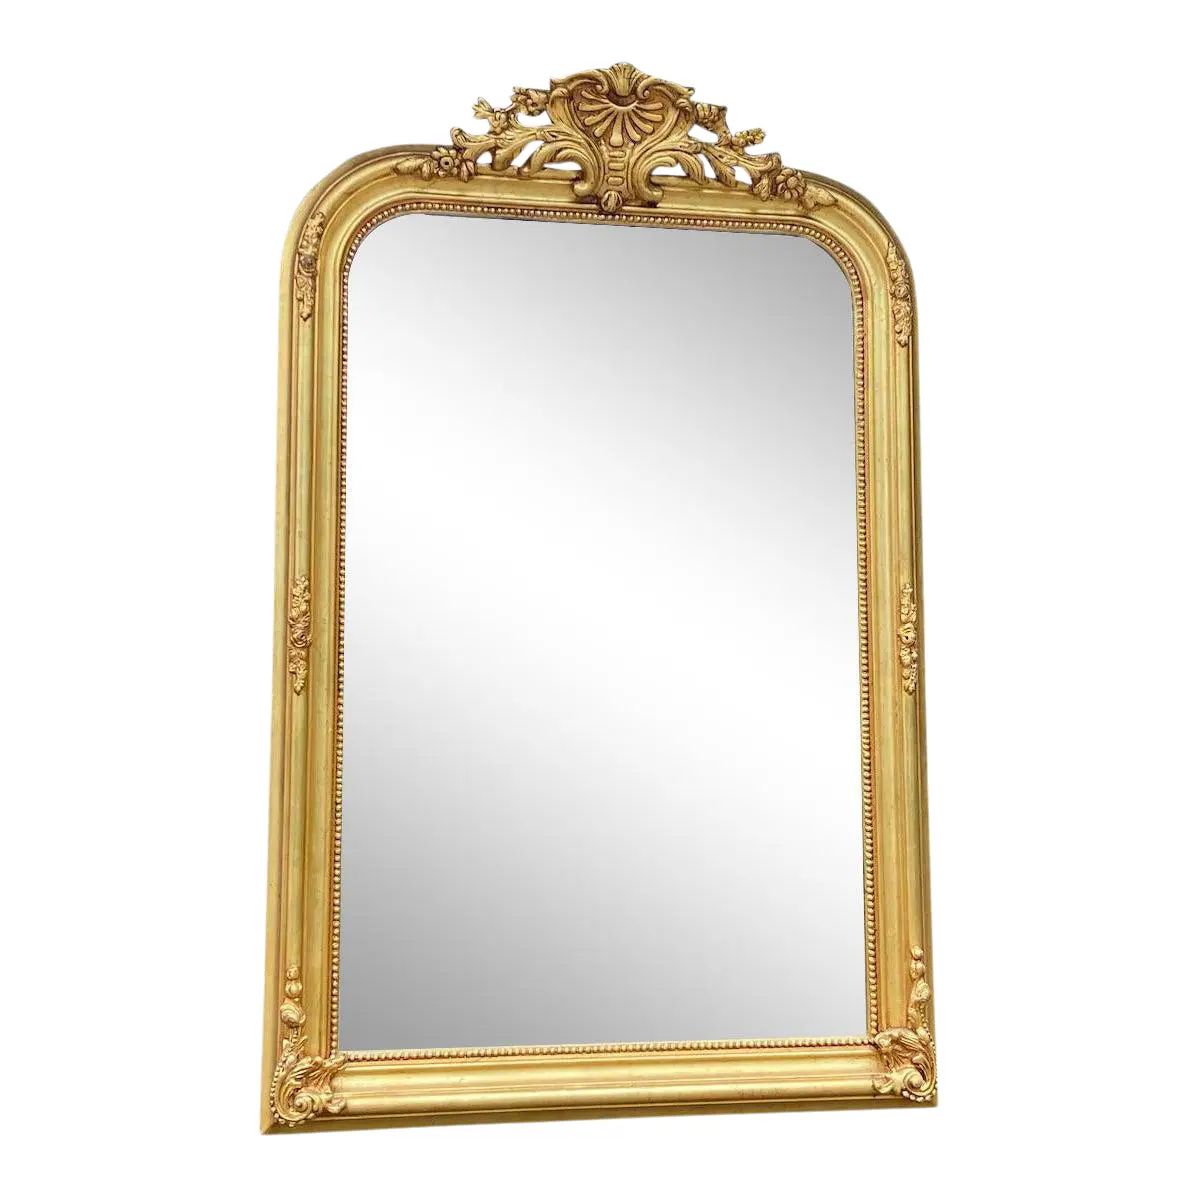 Contemporary Full Length/Floor Mirror in French Louis XVI-Style in Antique Gold Finish | Chairish